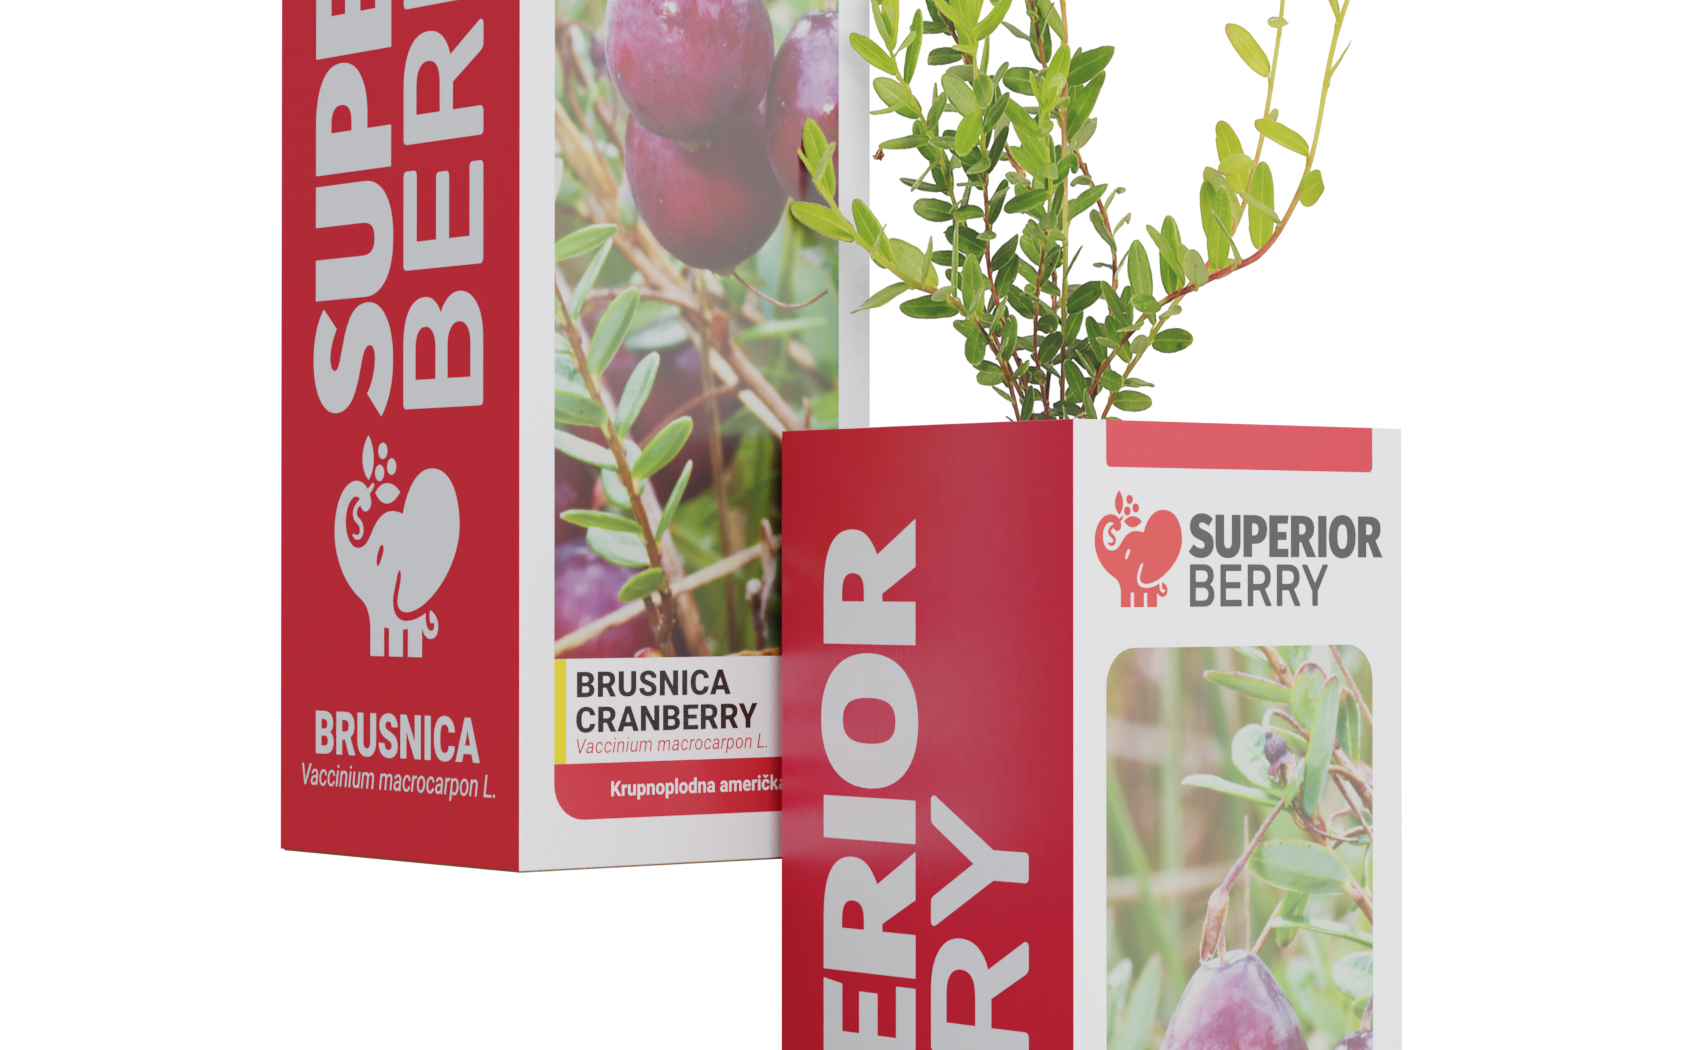 superior berry cranberry seedling in the box